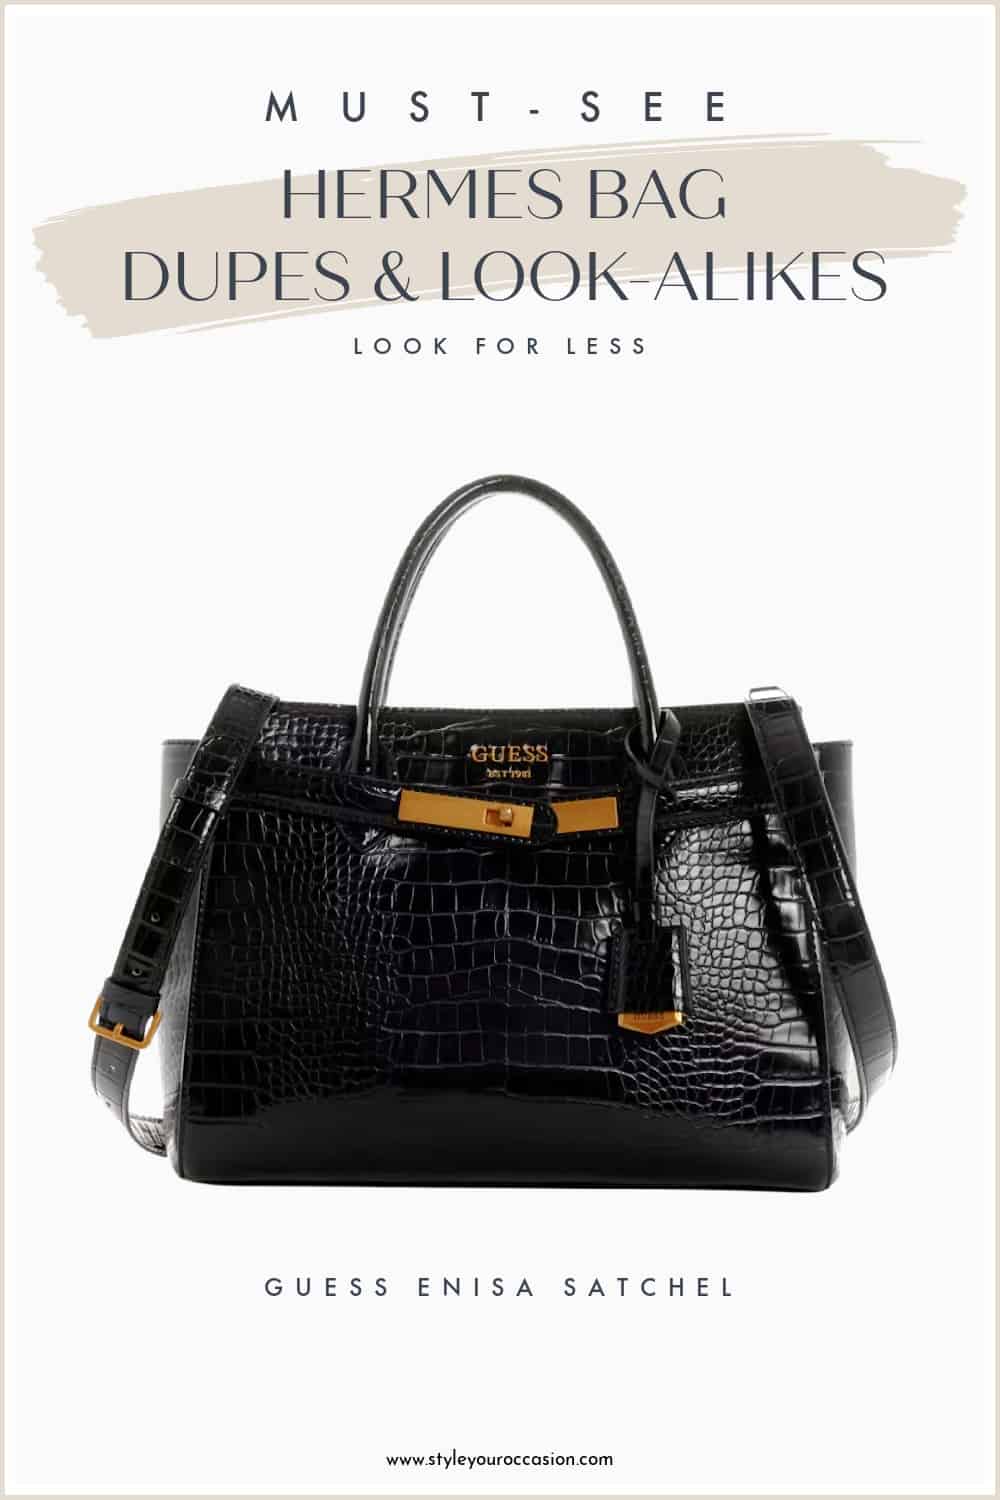 an image board of a croc-embossed black leather Hermes bag dupe from guess